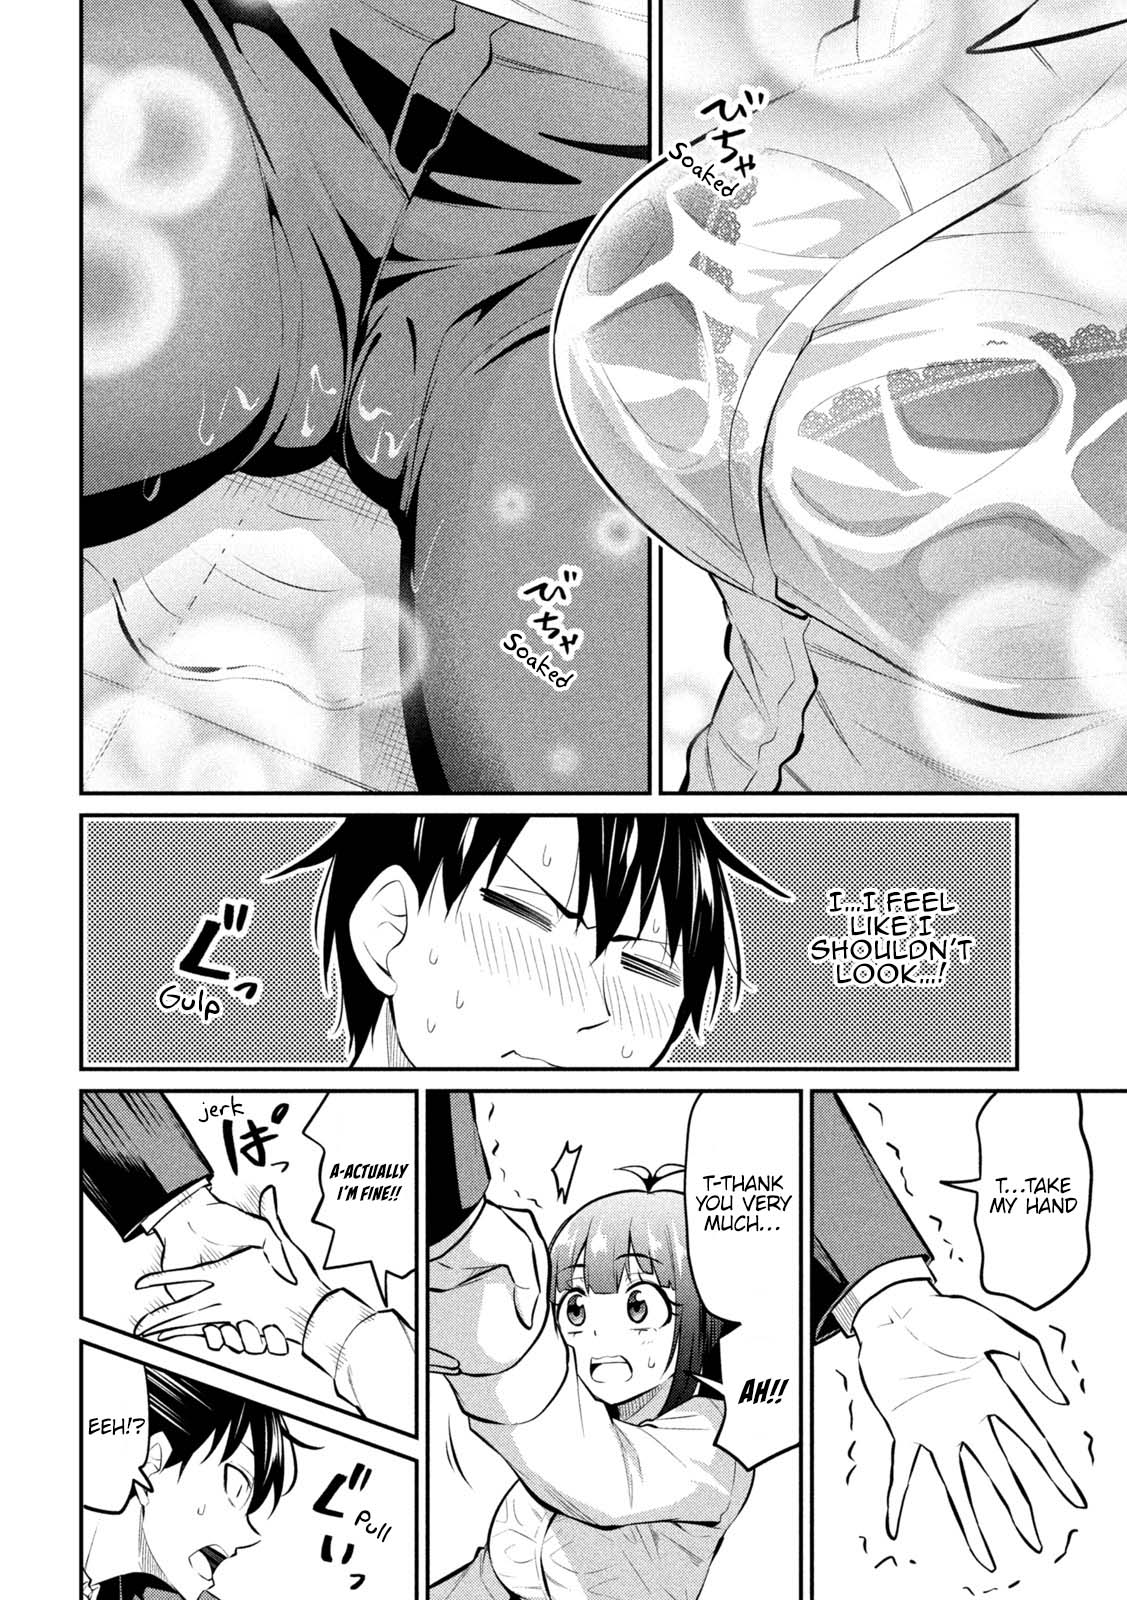 Home Cabaret ~Operation: Making A Cabaret Club At Home So Nii-Chan Can Get Used To Girls~ Chapter 5 #9